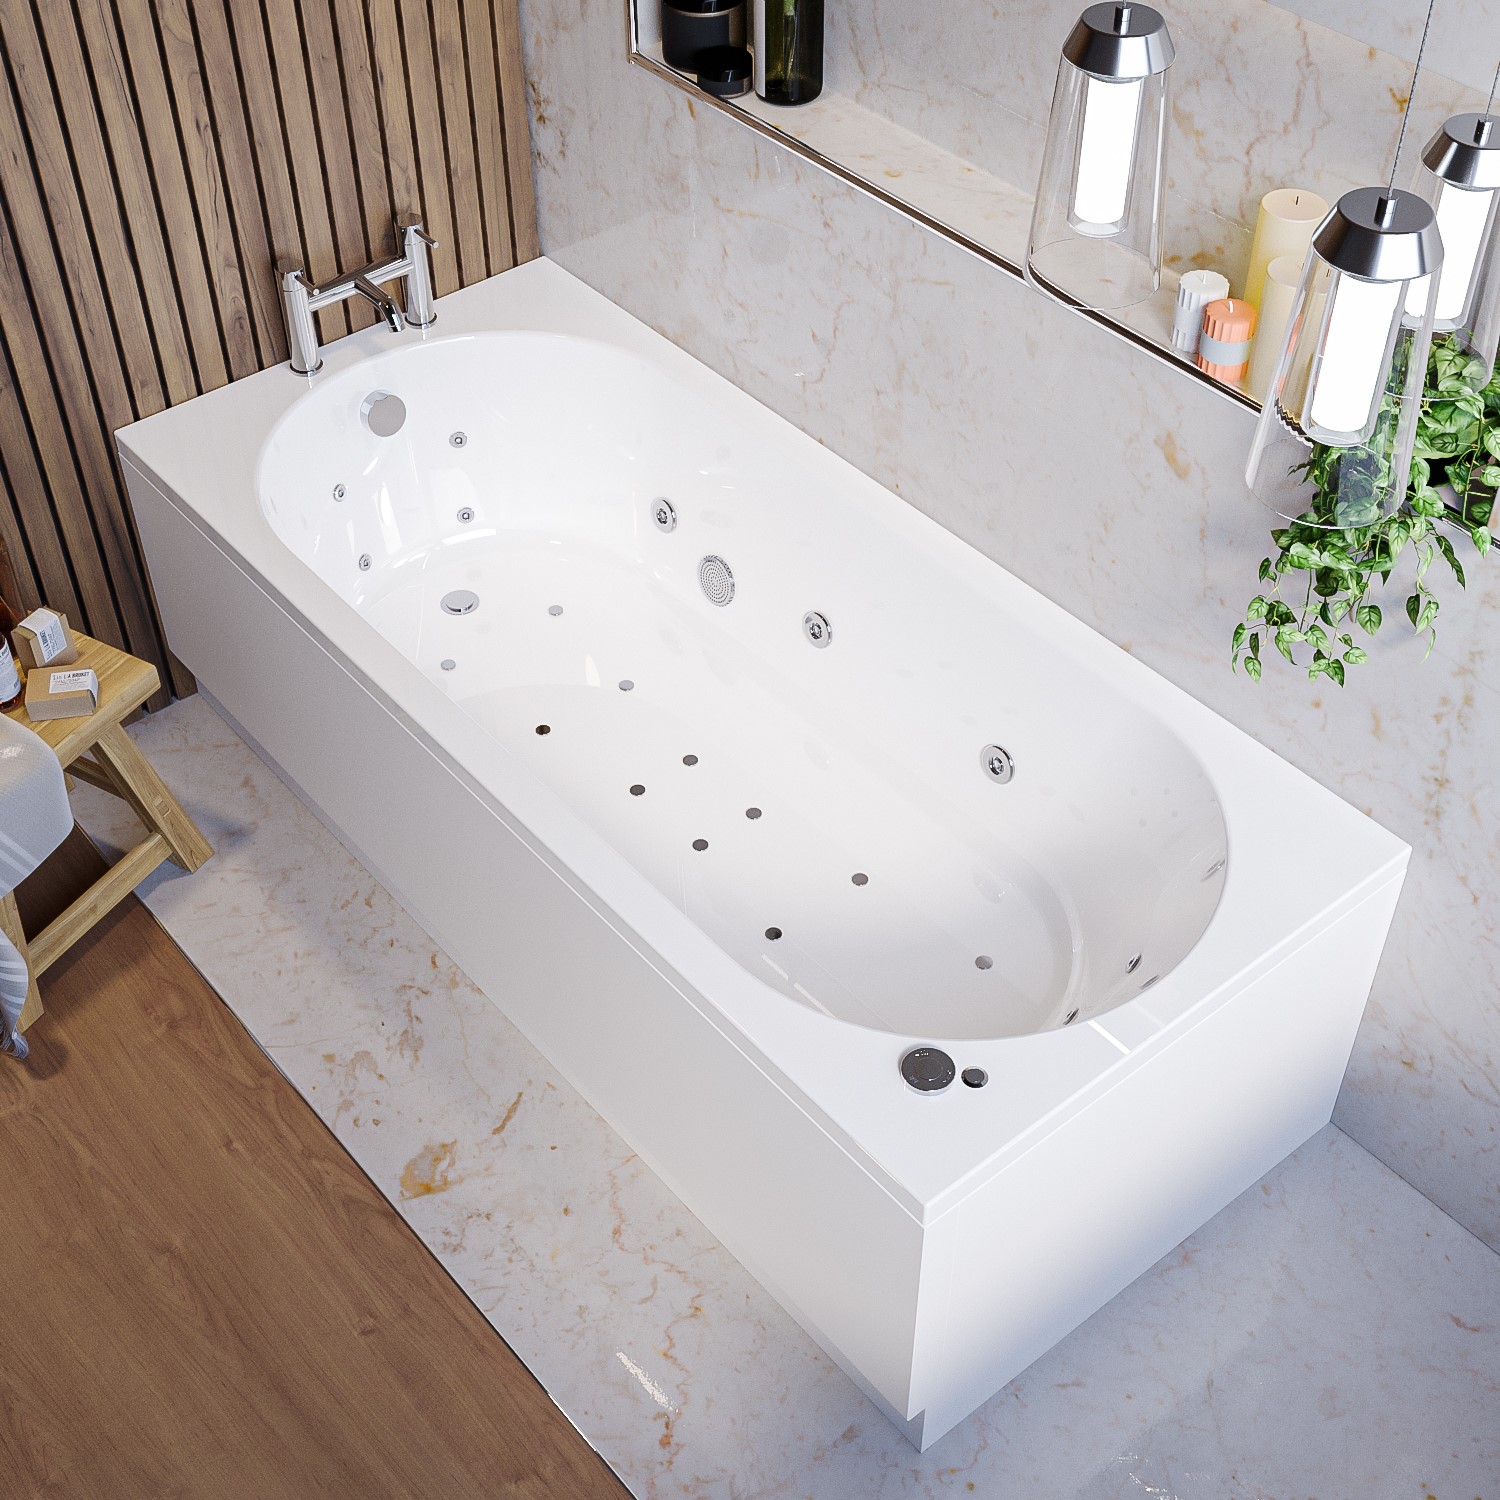 Alton Single Ended Bath with 14 Jet Whirlpool System and 12 Jet Airspa System - 1800 x 800mm